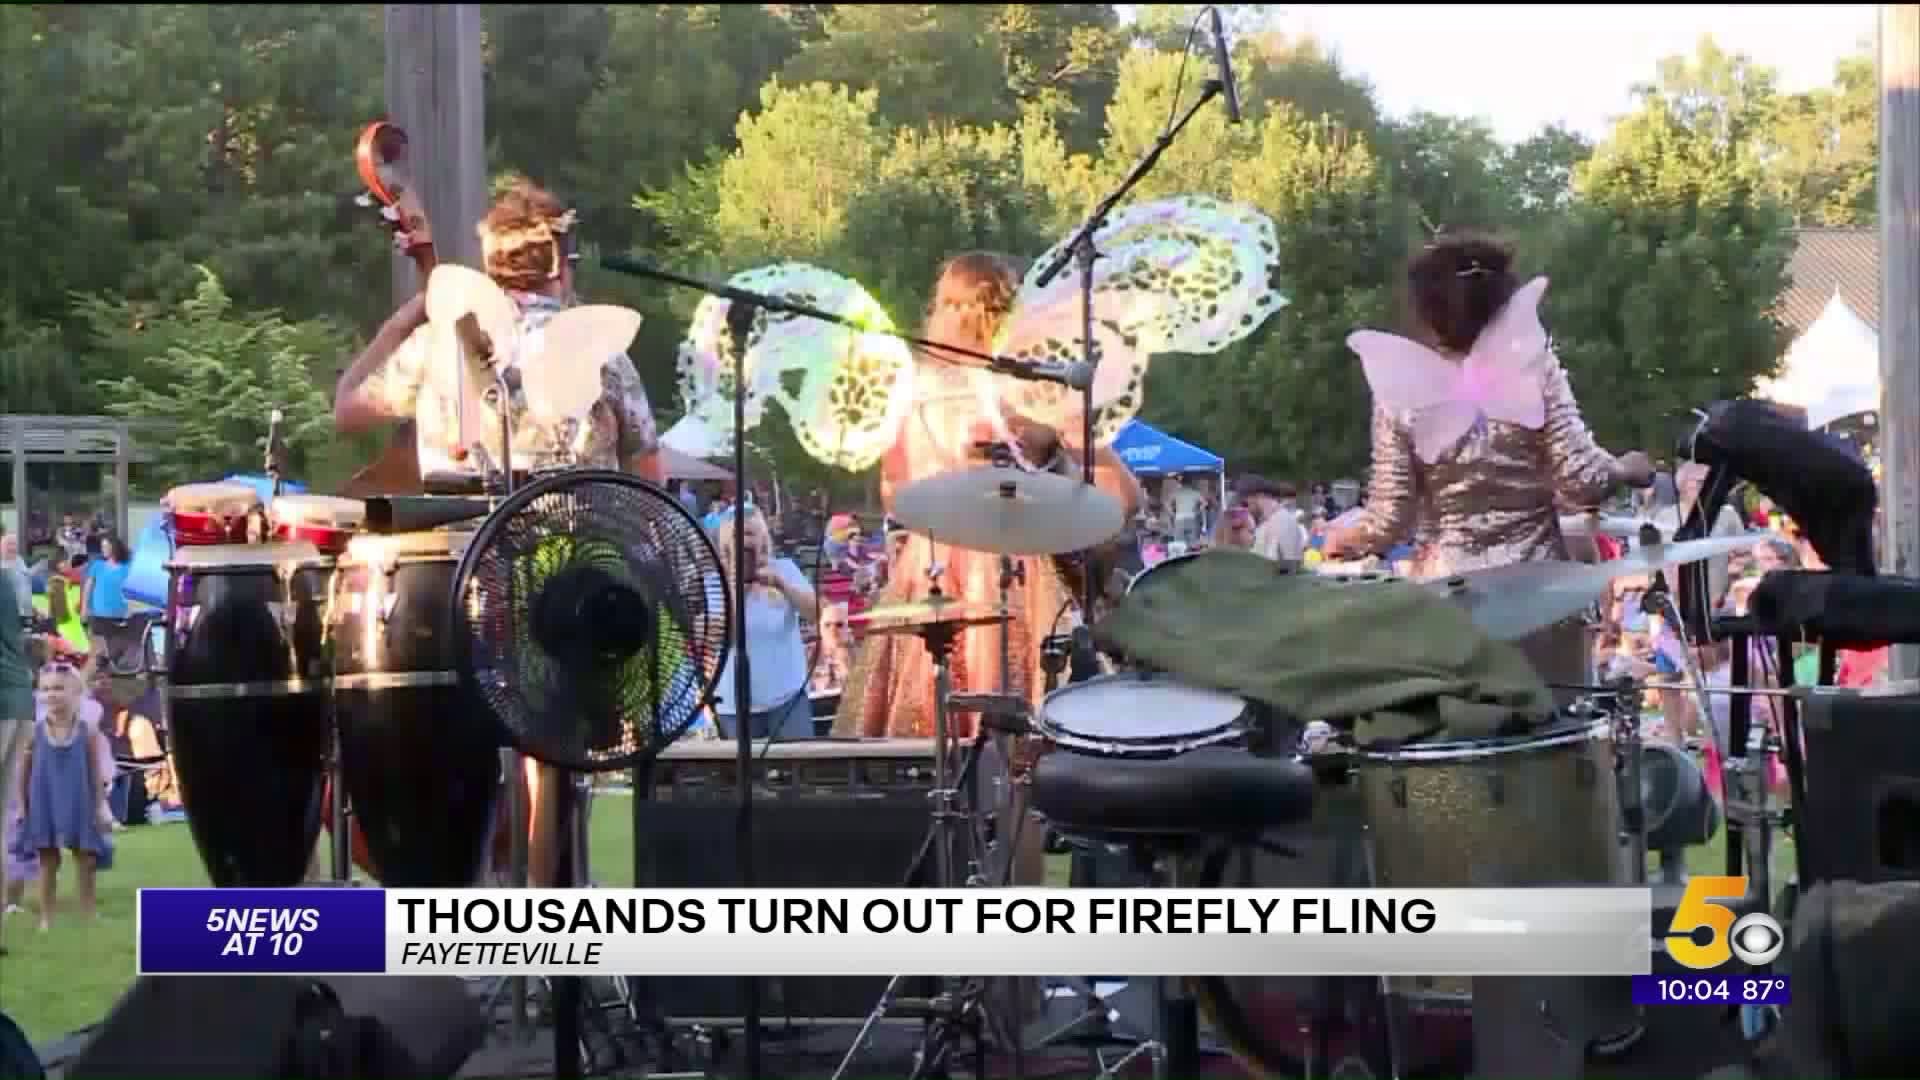 Thousands Turn Out For Firefly Fing